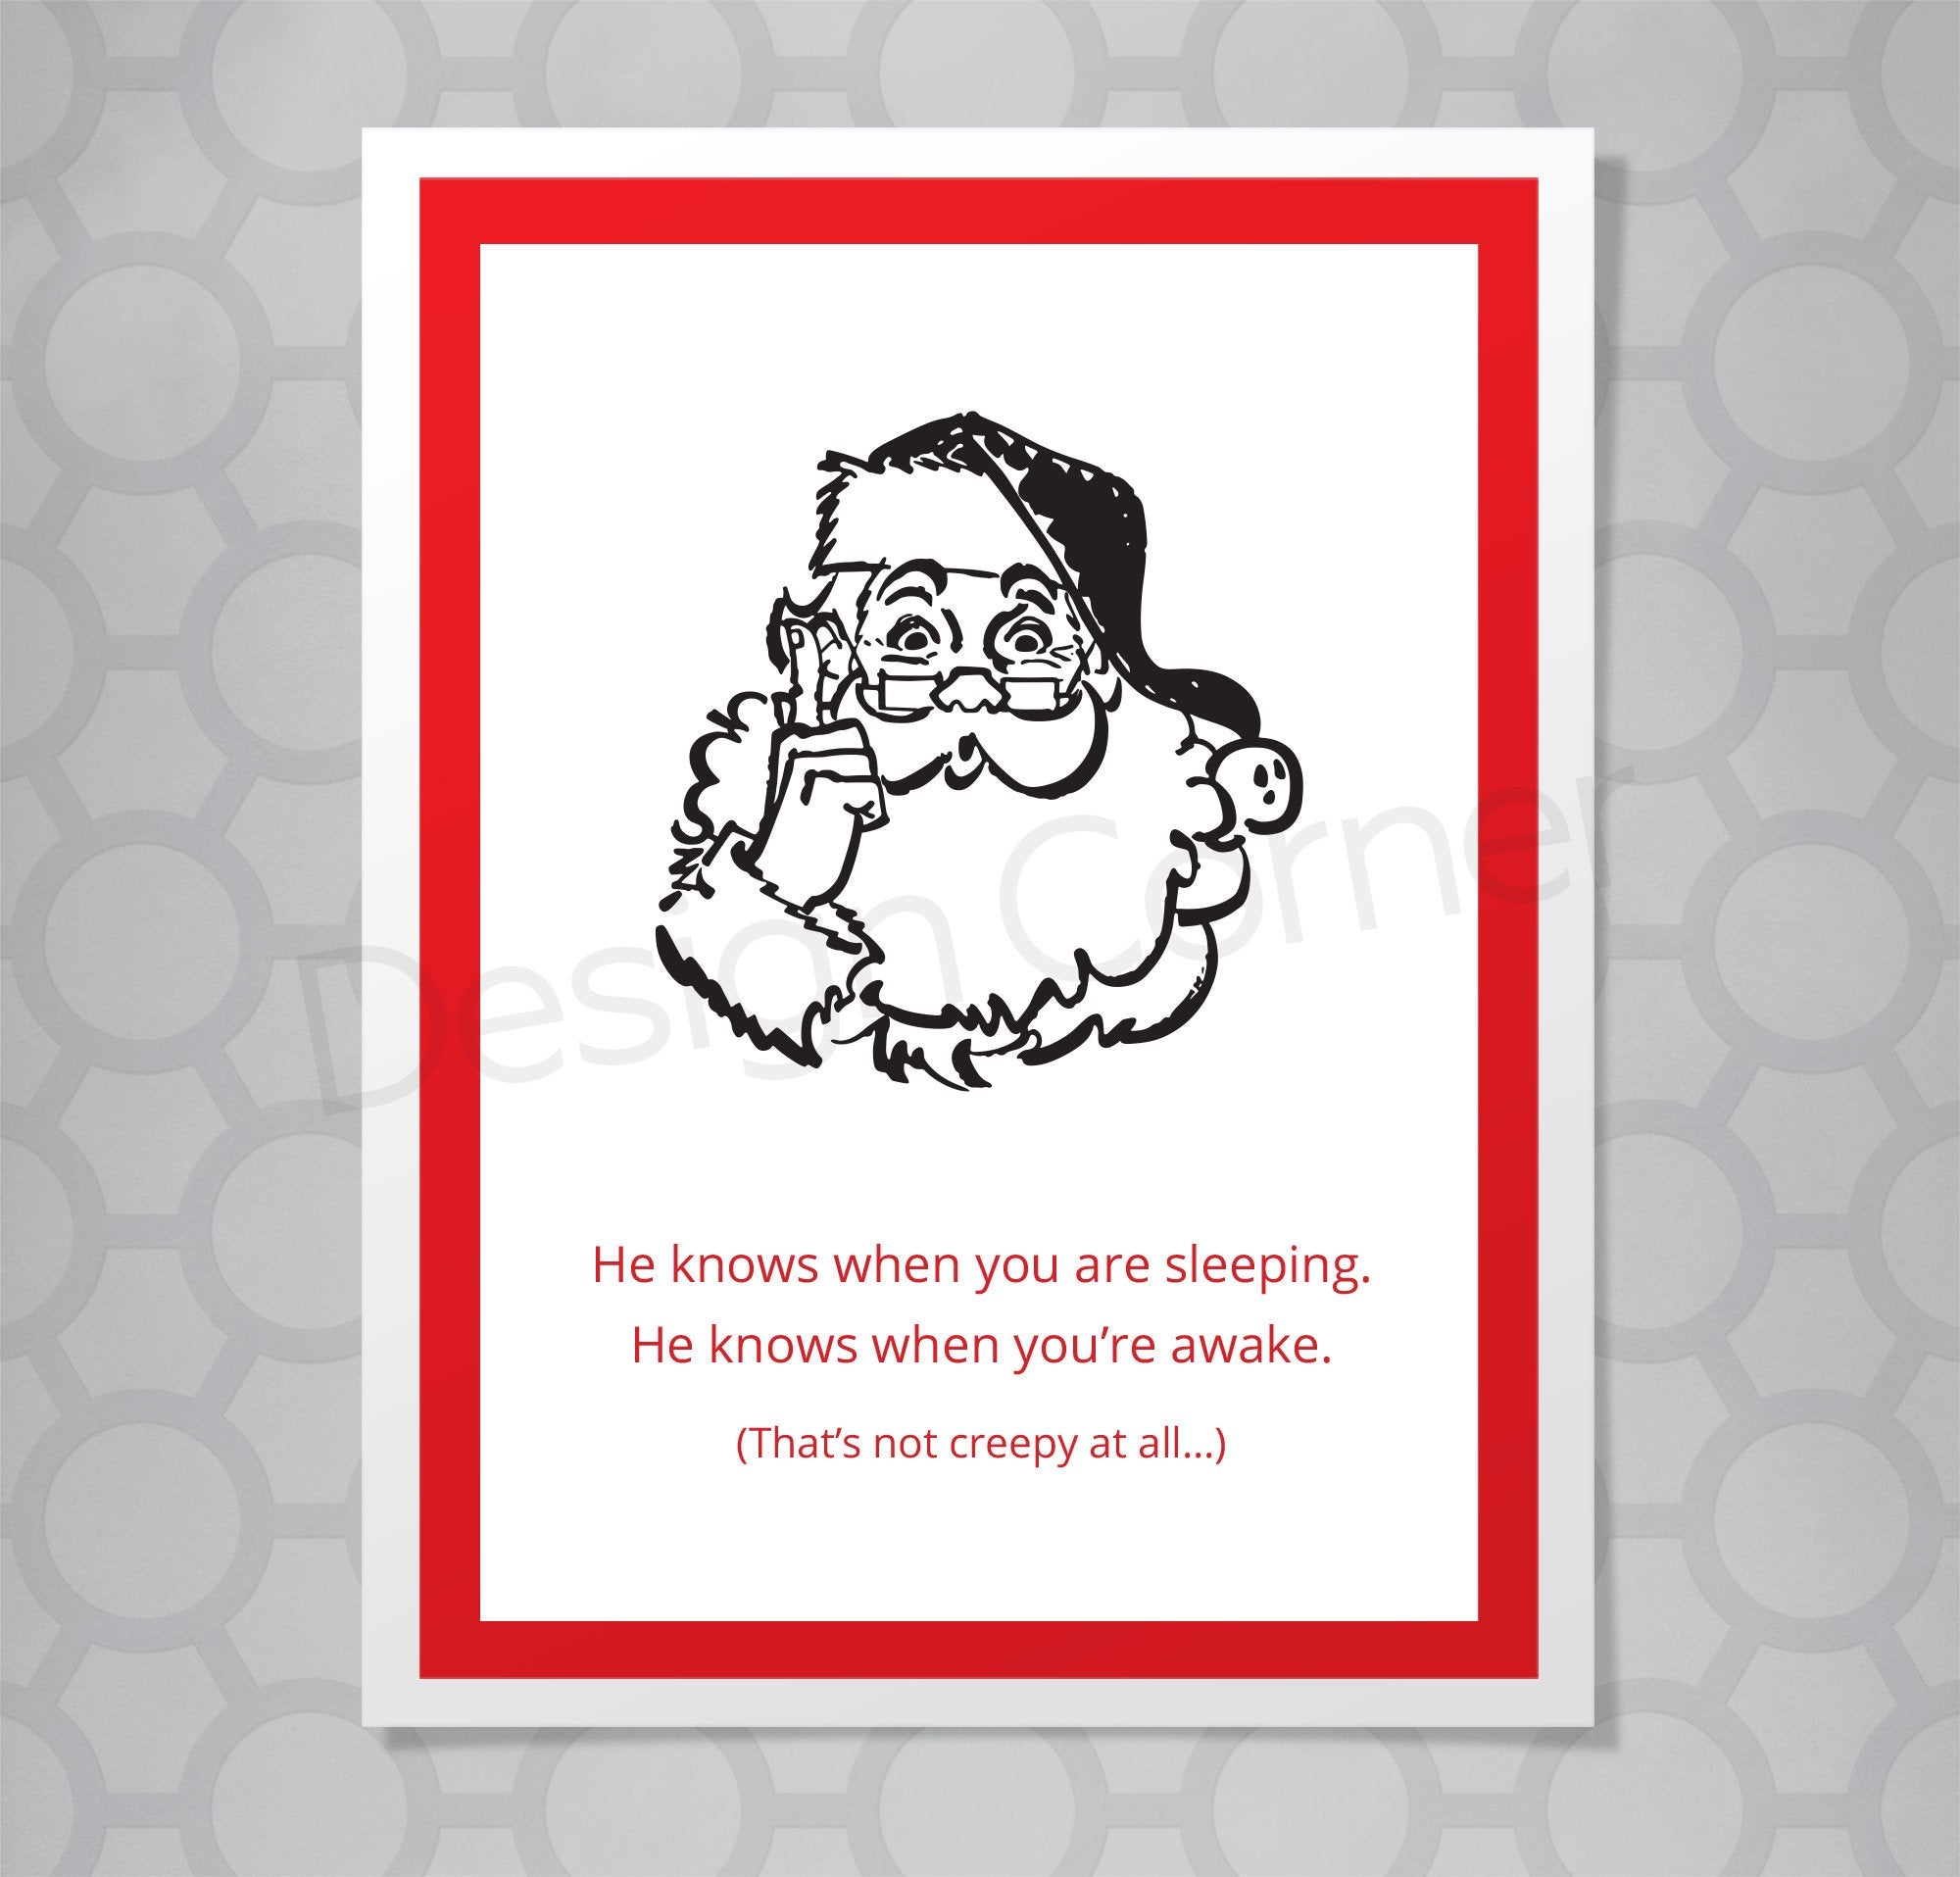 Illustration of Santa Claus on Christmas card with caption "He knows when you are sleeping. He knows when you're awake. (That's not creepy at all)"